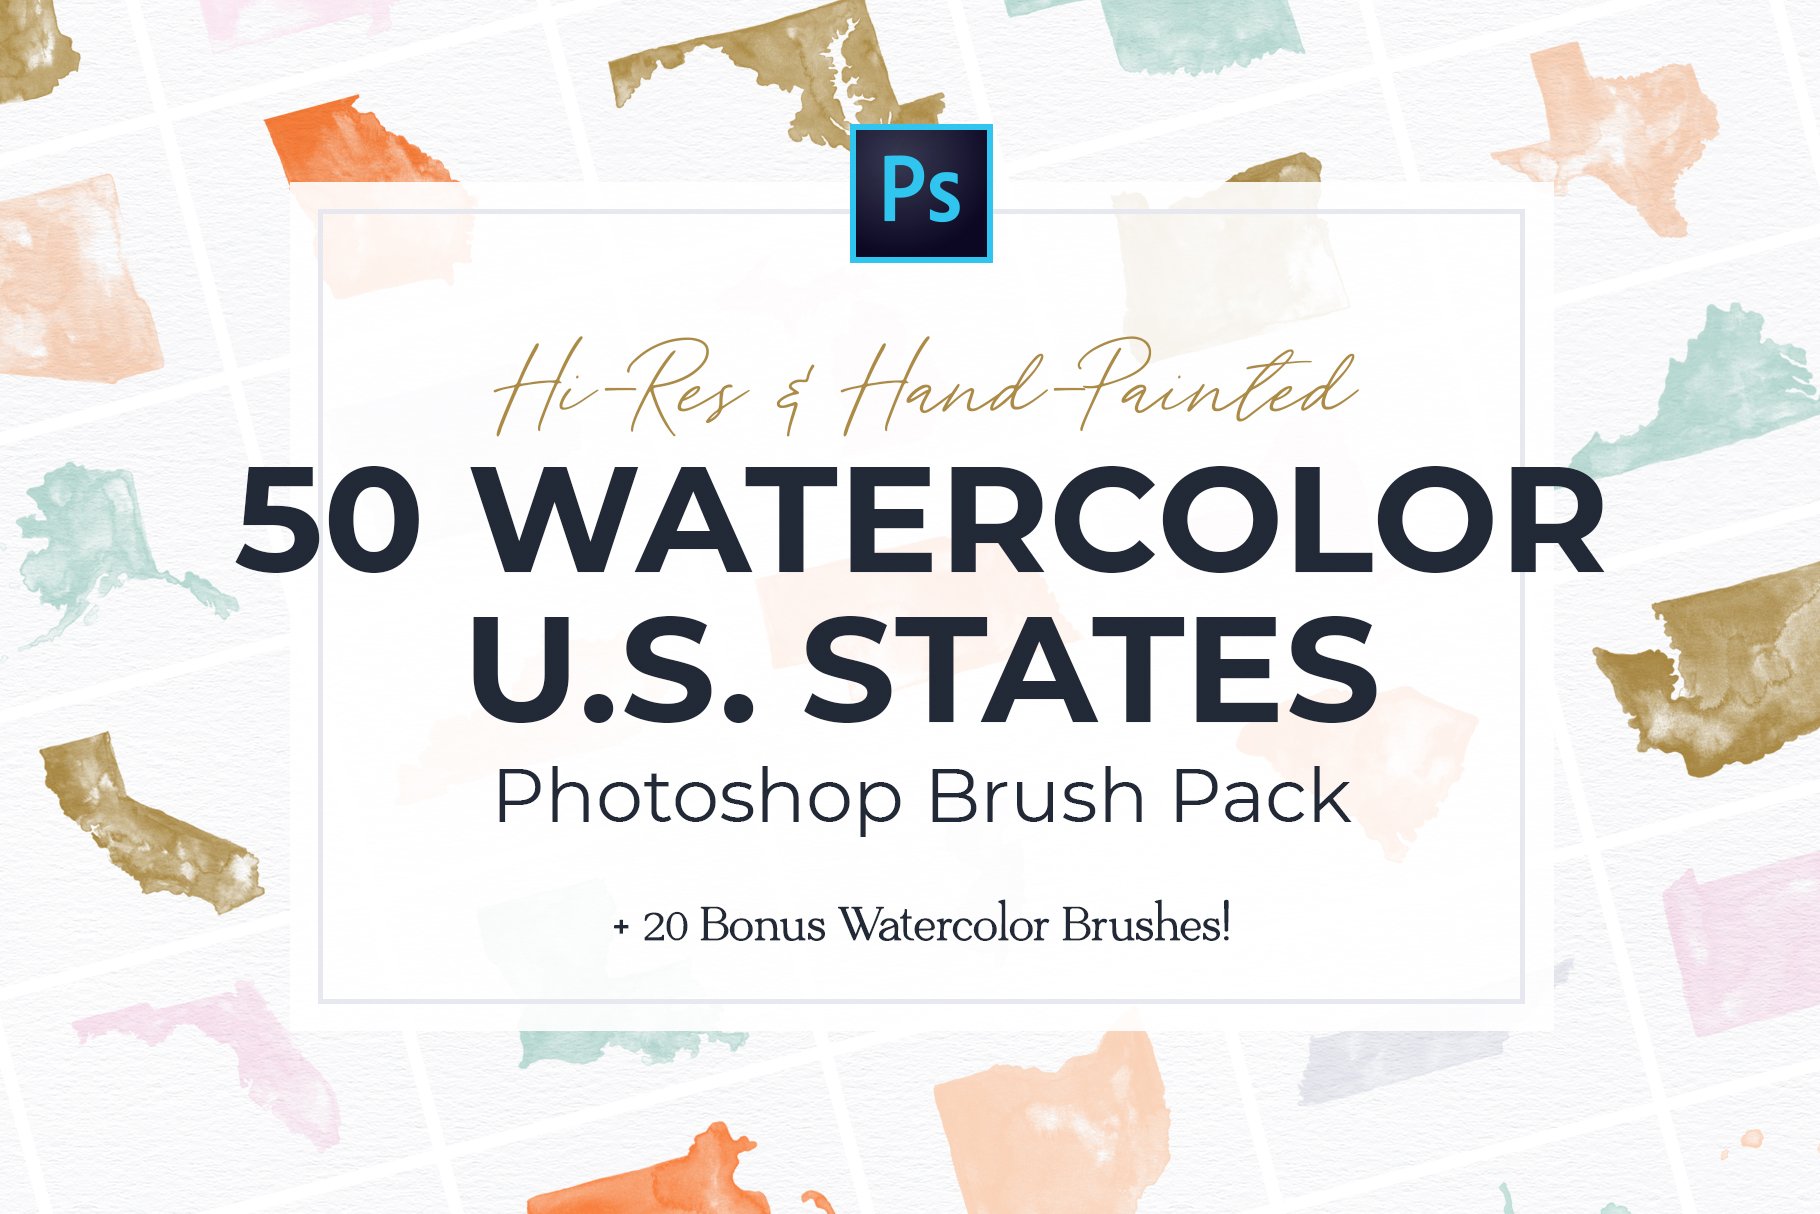 United States Watercolor PS Brushescover image.